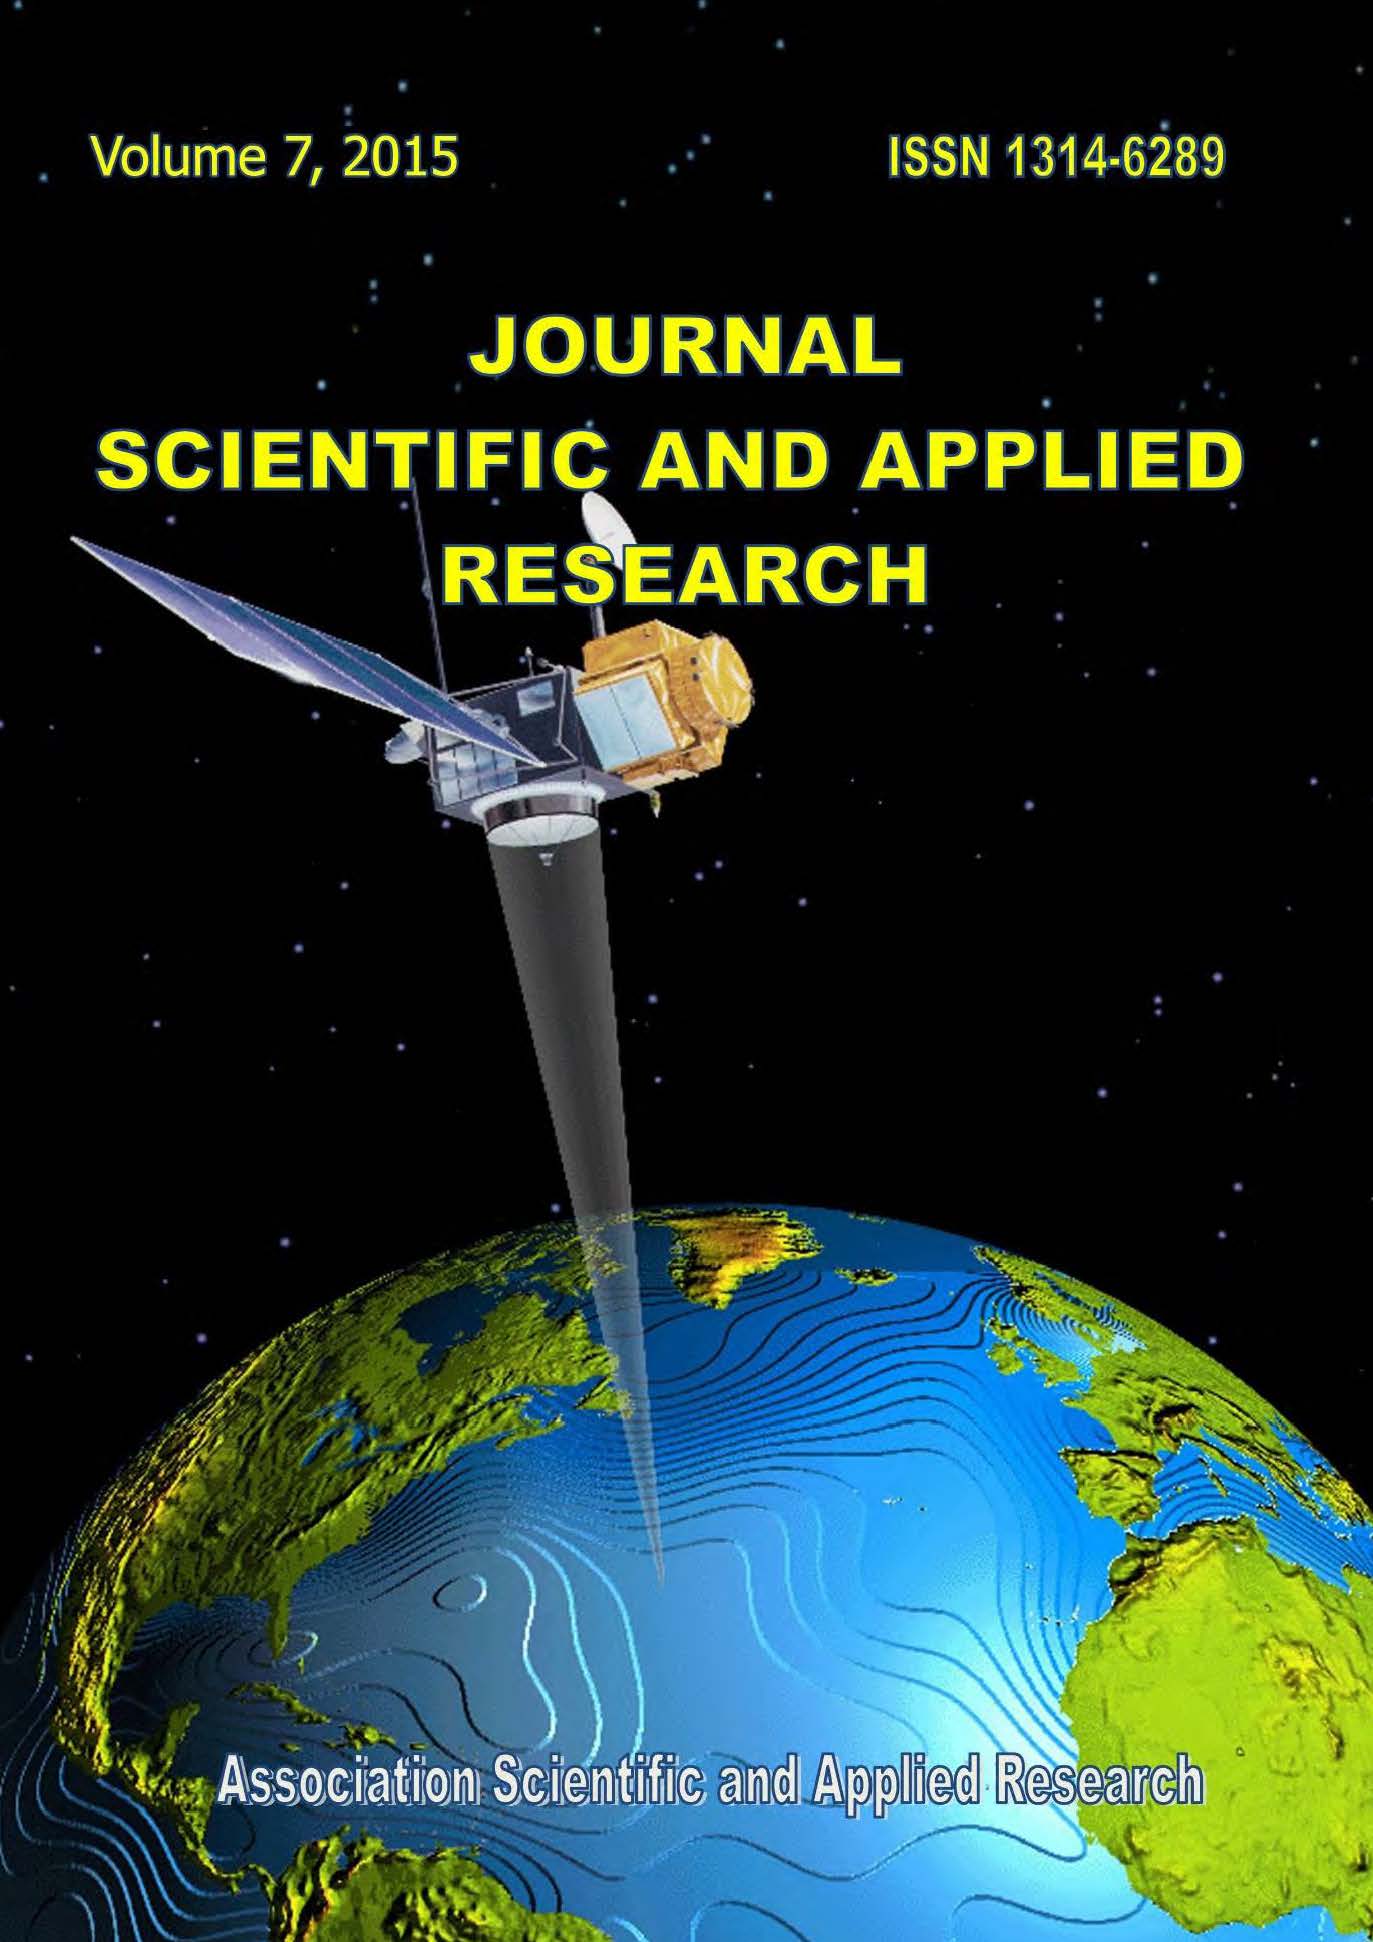 					View Vol. 7 No. 1 (2015): Journal Scientific and Applied Research
				